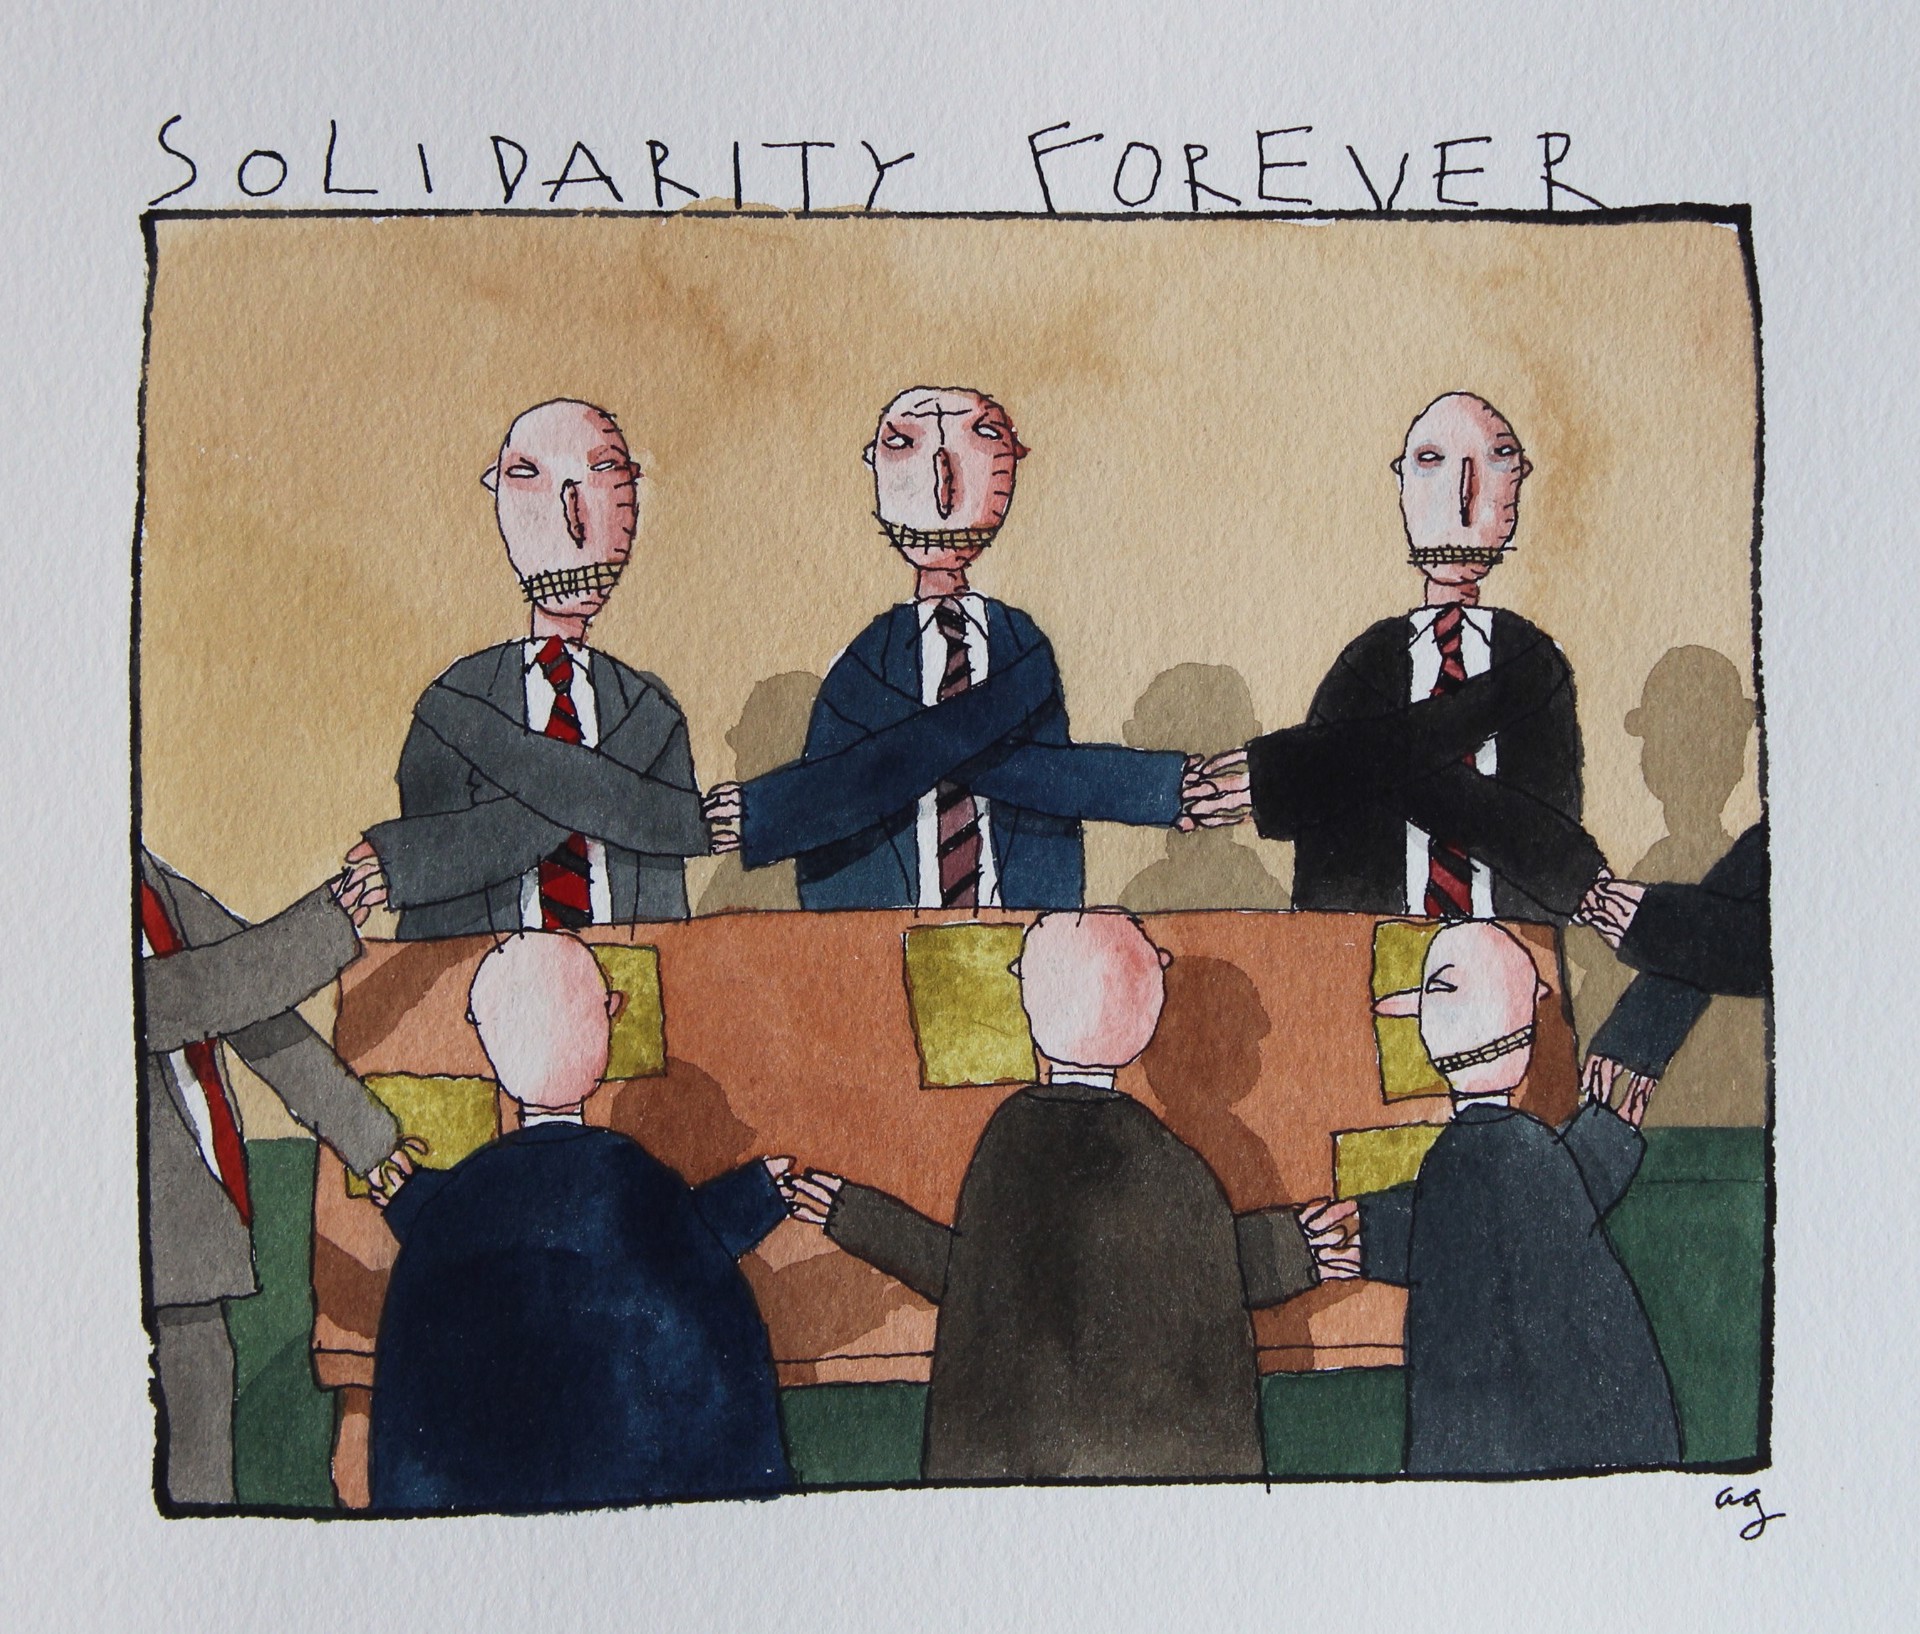 Solidarity Forever by Alan Gerson